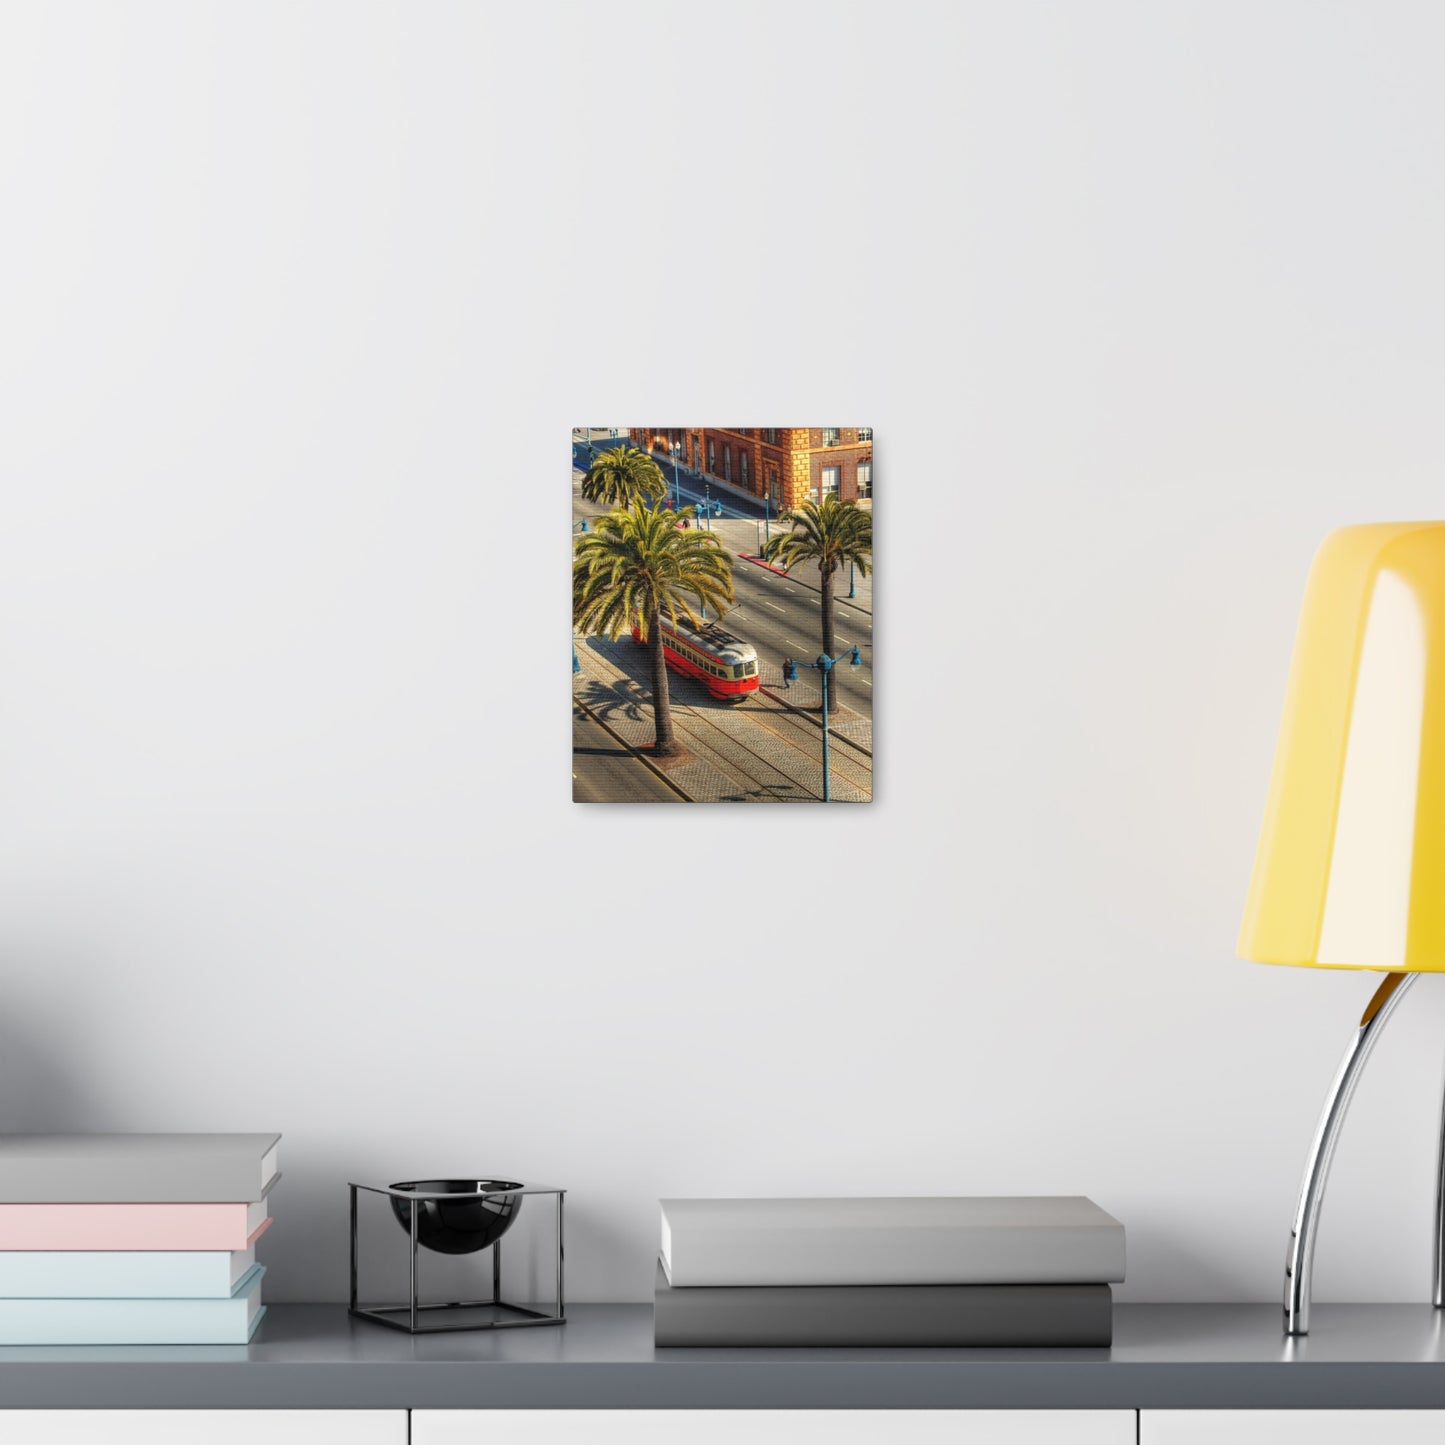 Canvas Print Of A Street Car On Embarcadero In San Francisco For Wall Art